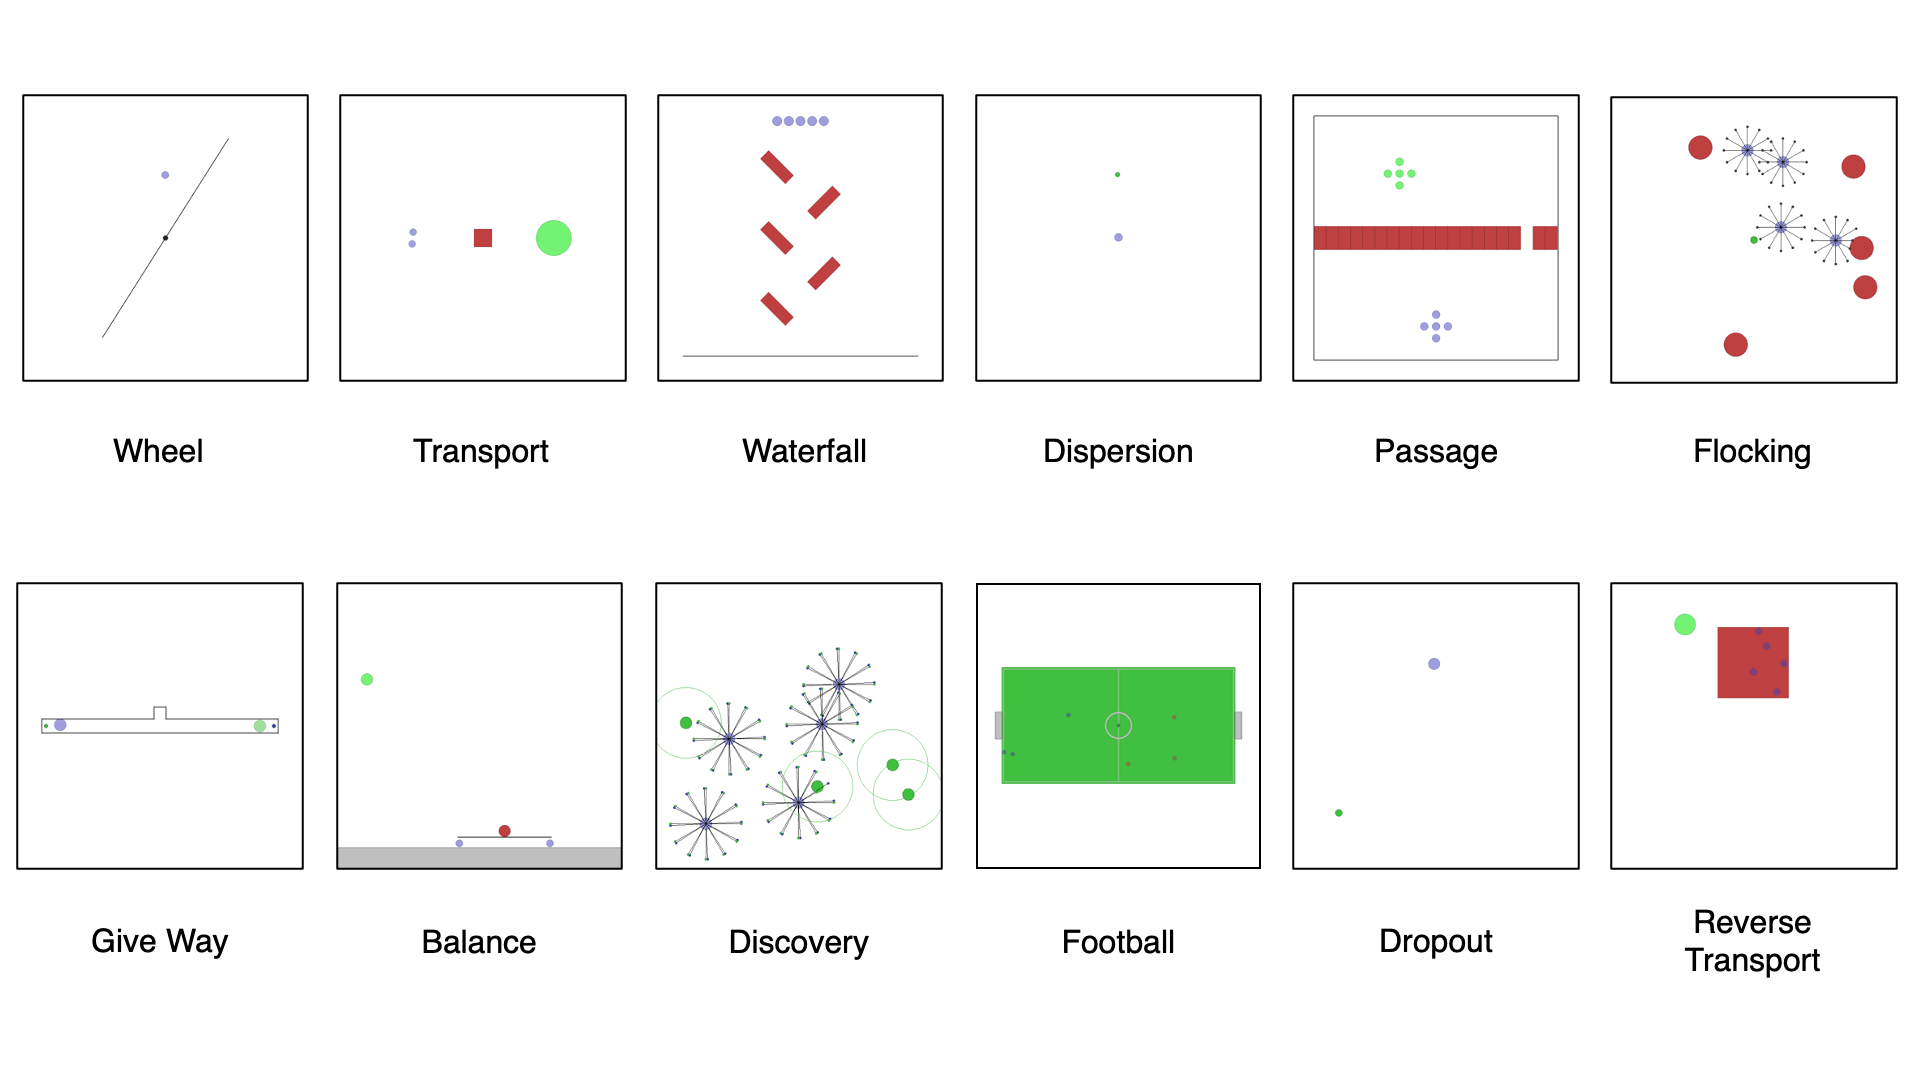 Multi-robot scenarios introduced in VMAS. Robots (blue shapes) interact among each other and with landmarks (green, red, and black shapes) to solve a task.